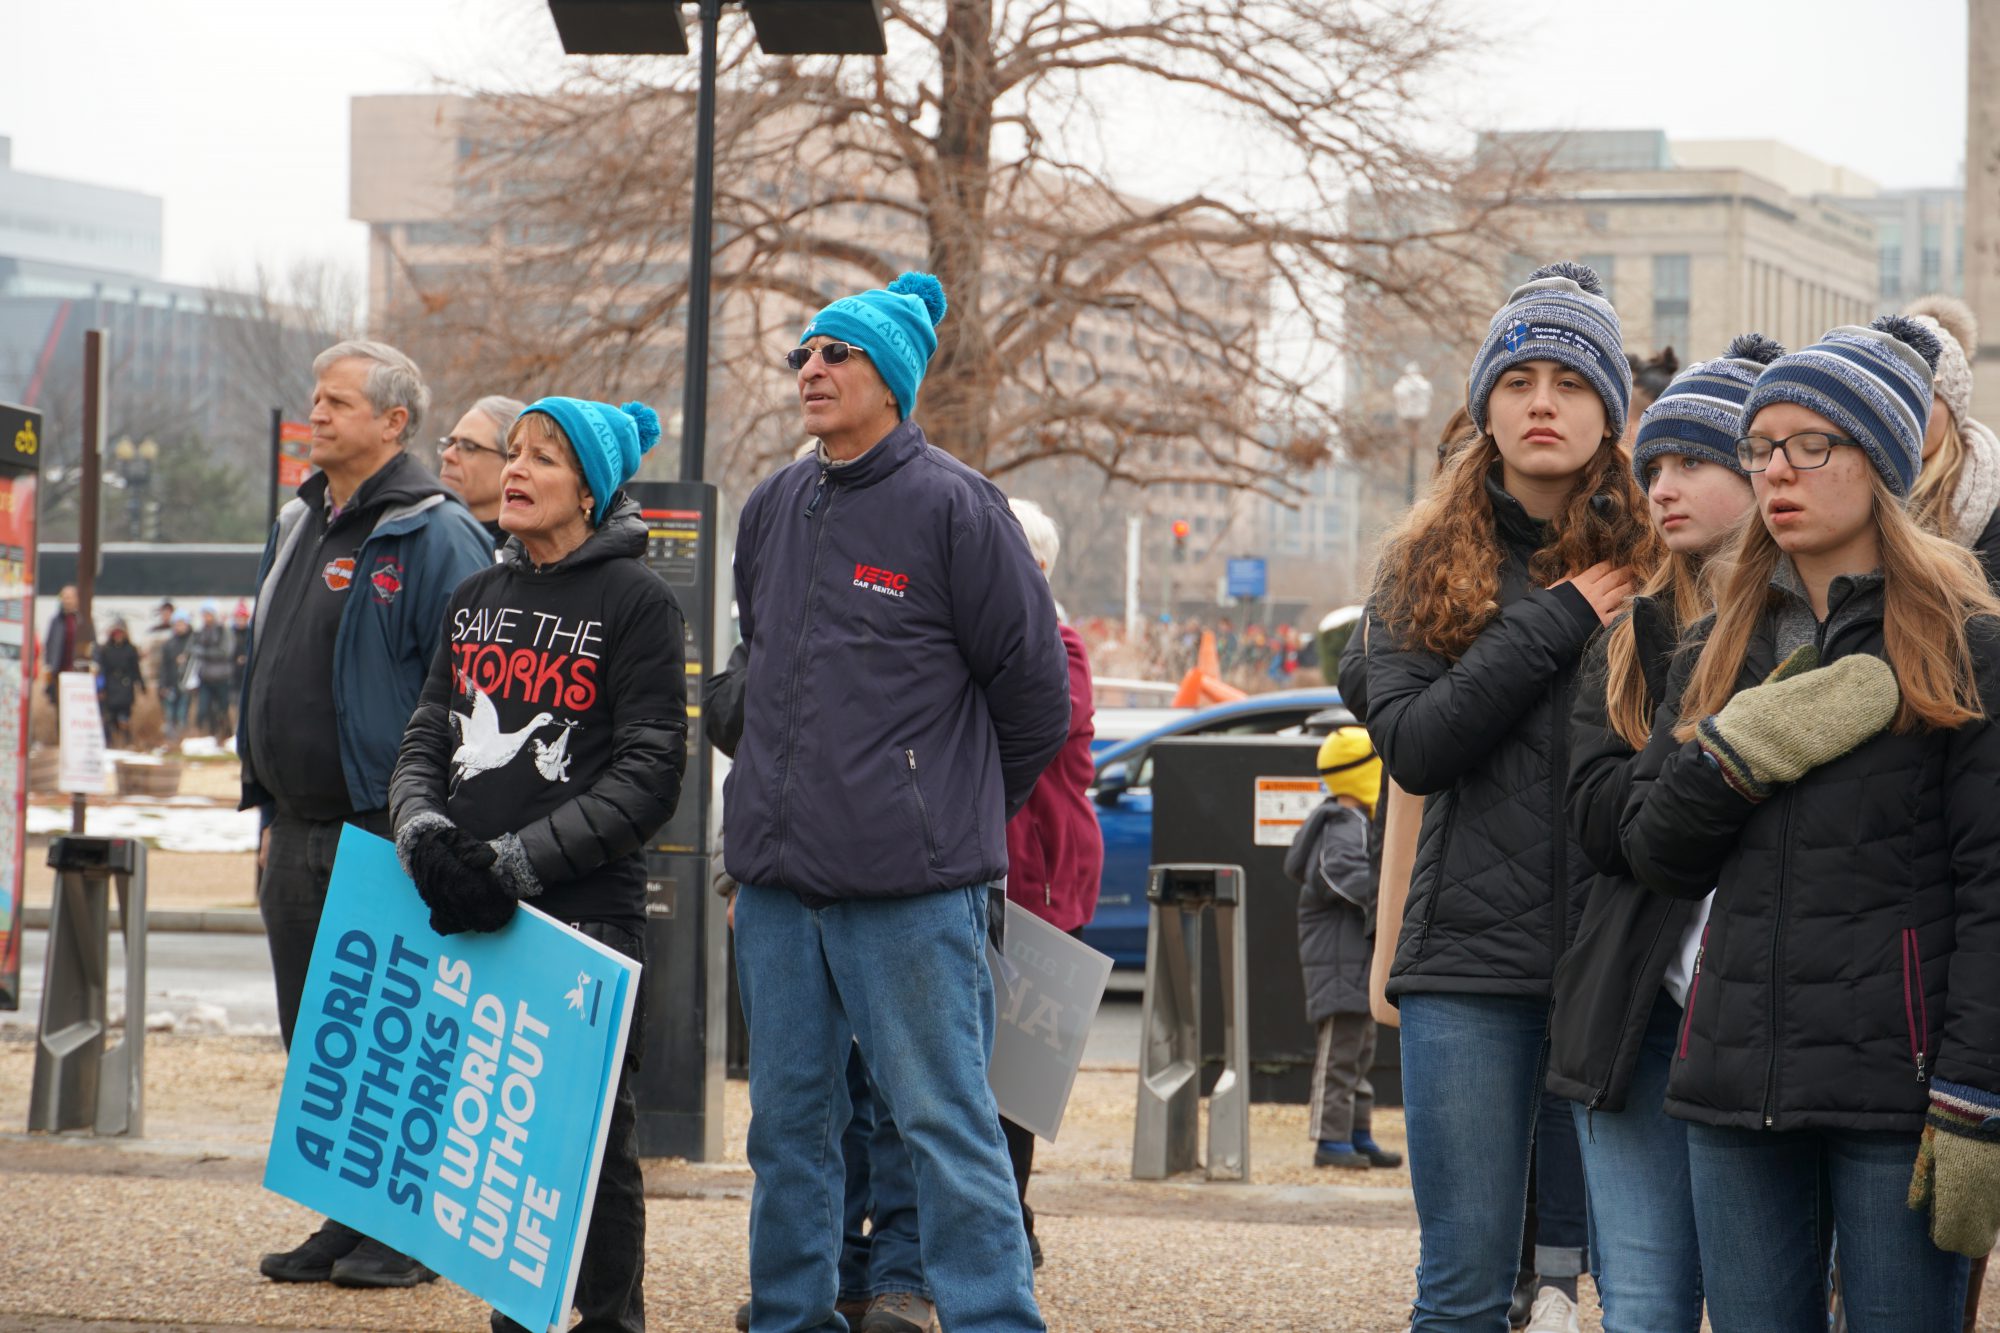 People said the Pledge of Allegiance and sang the National Anthem at the rally before the March for Life. (Ester Wells/MNS)